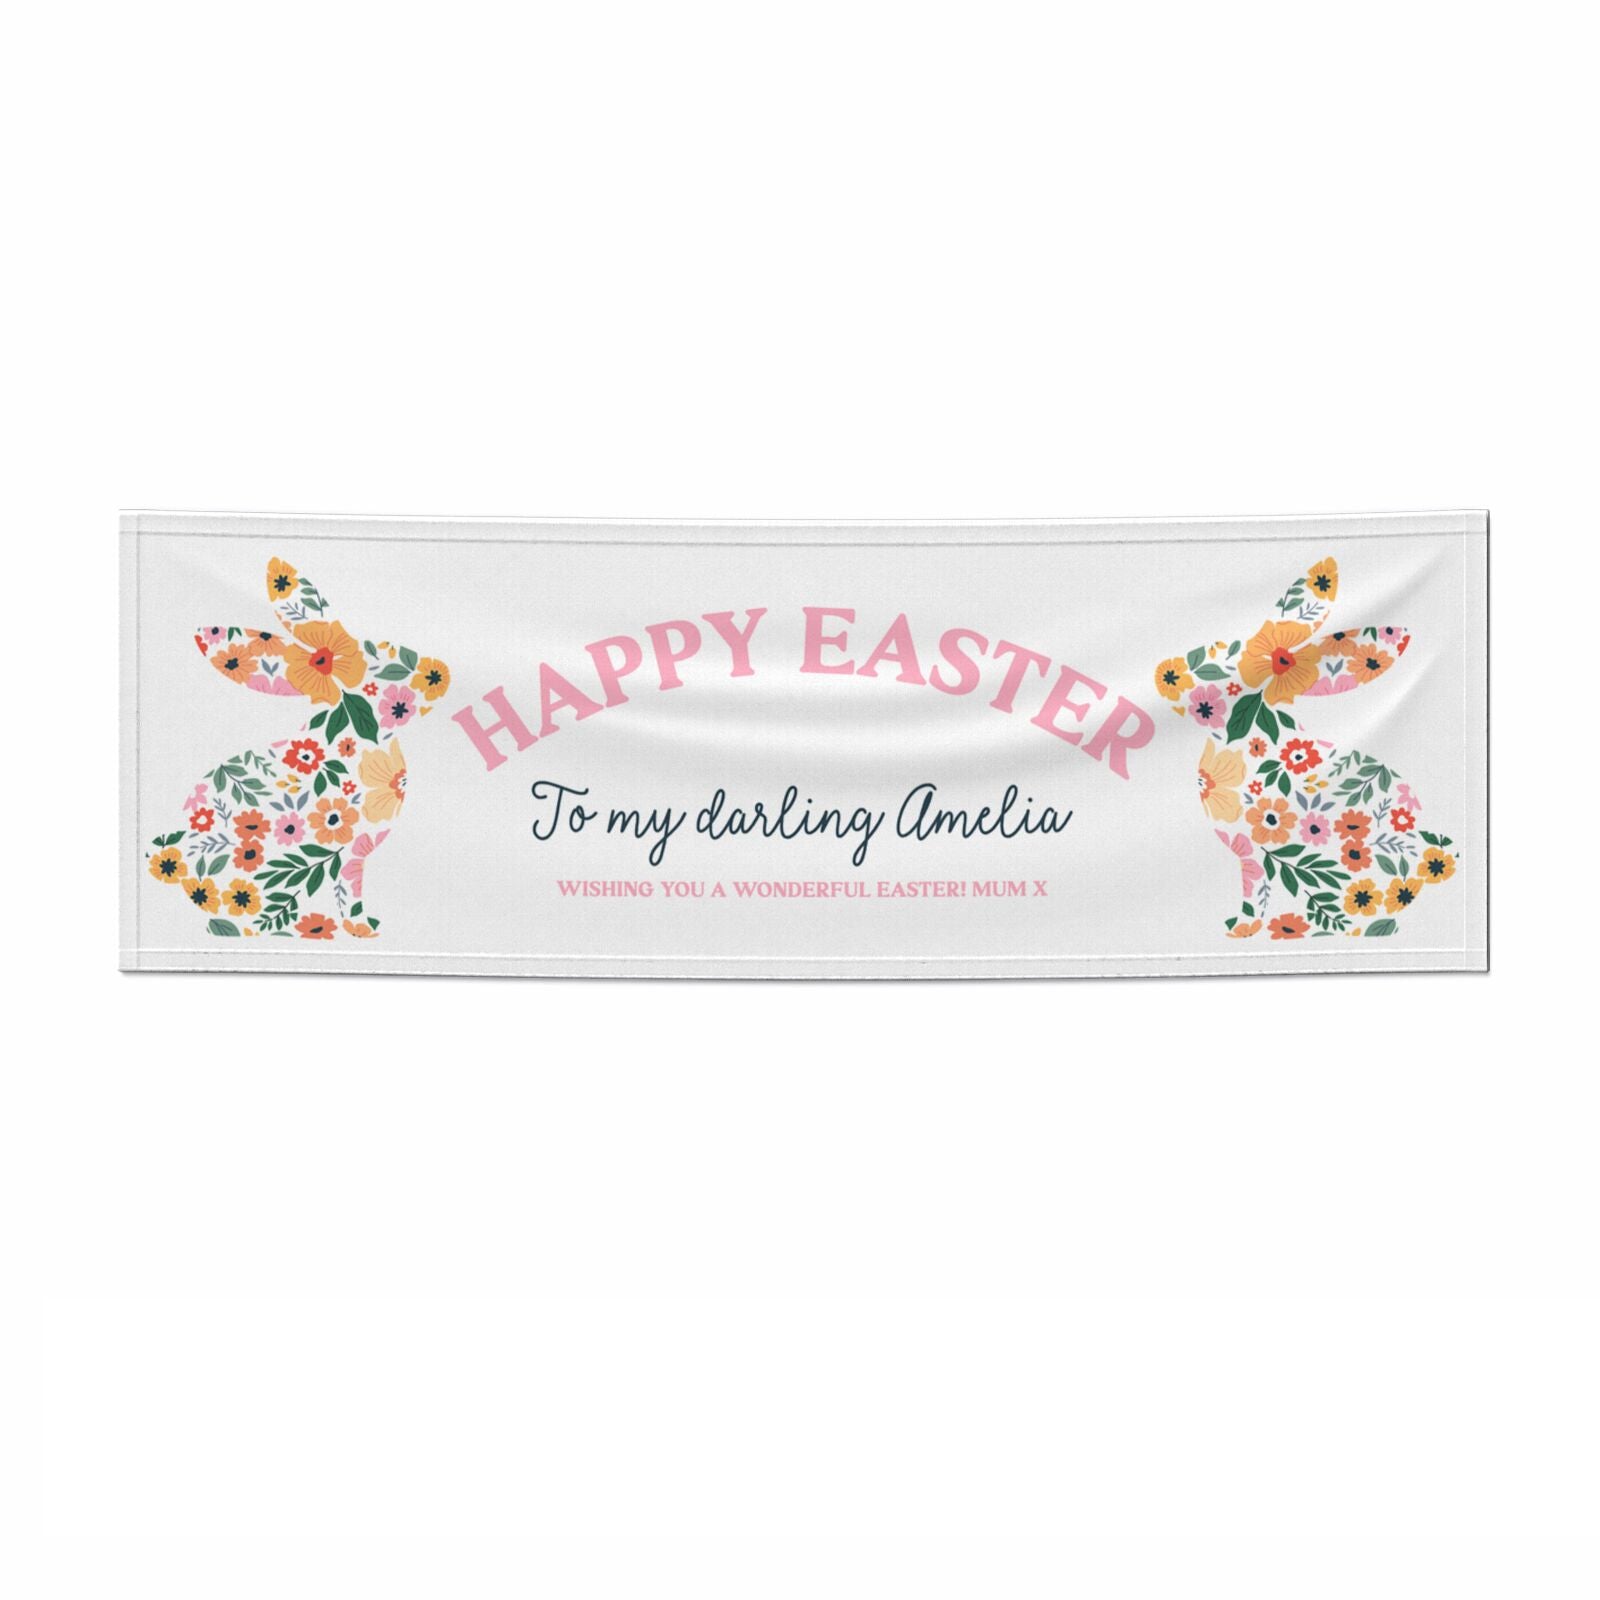 Happy Easter 6x2 Paper Banner